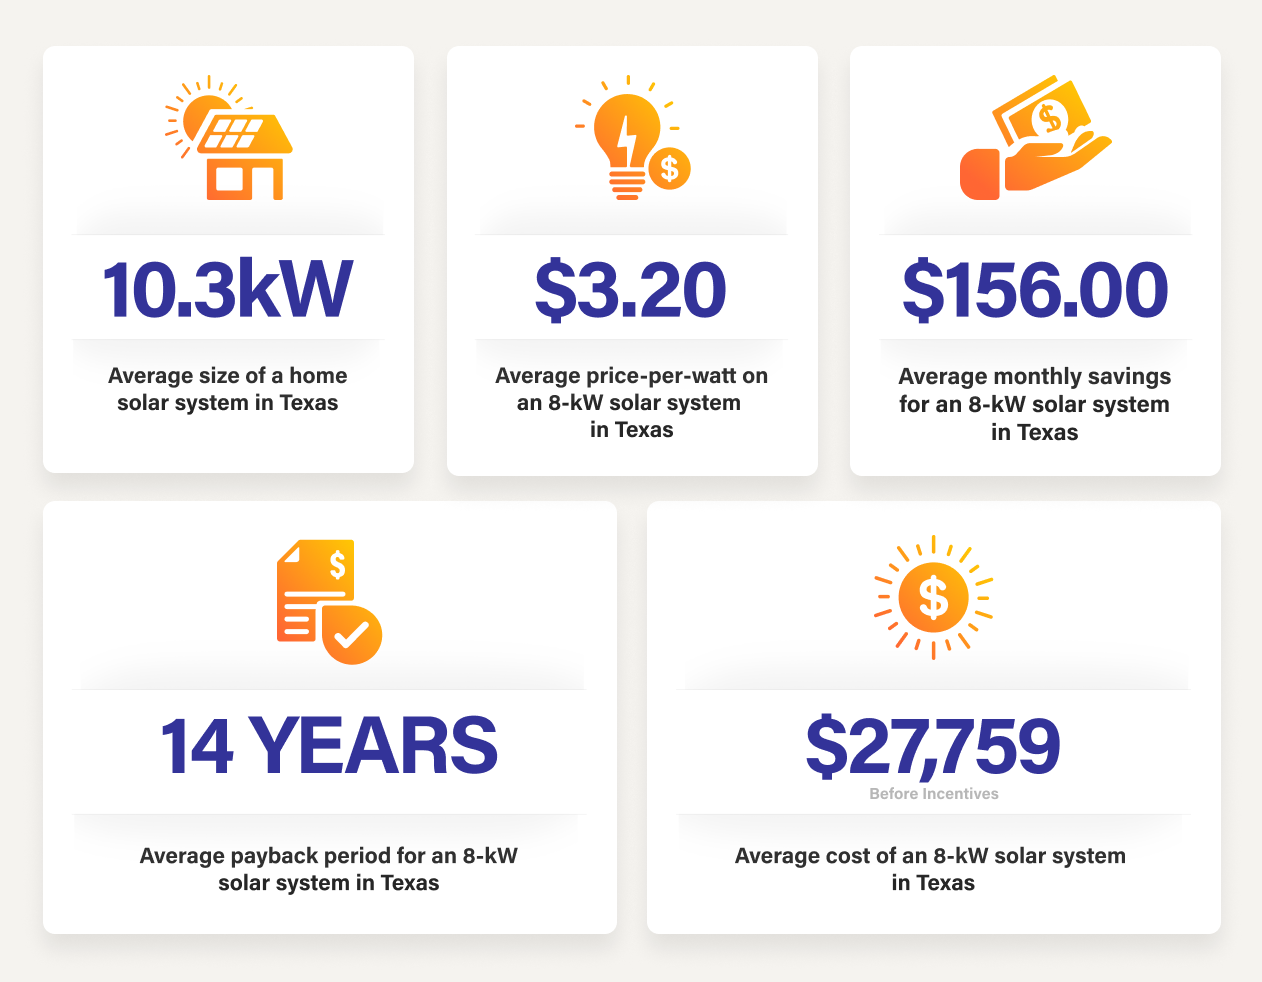 Cost of Solar Panels in Texas